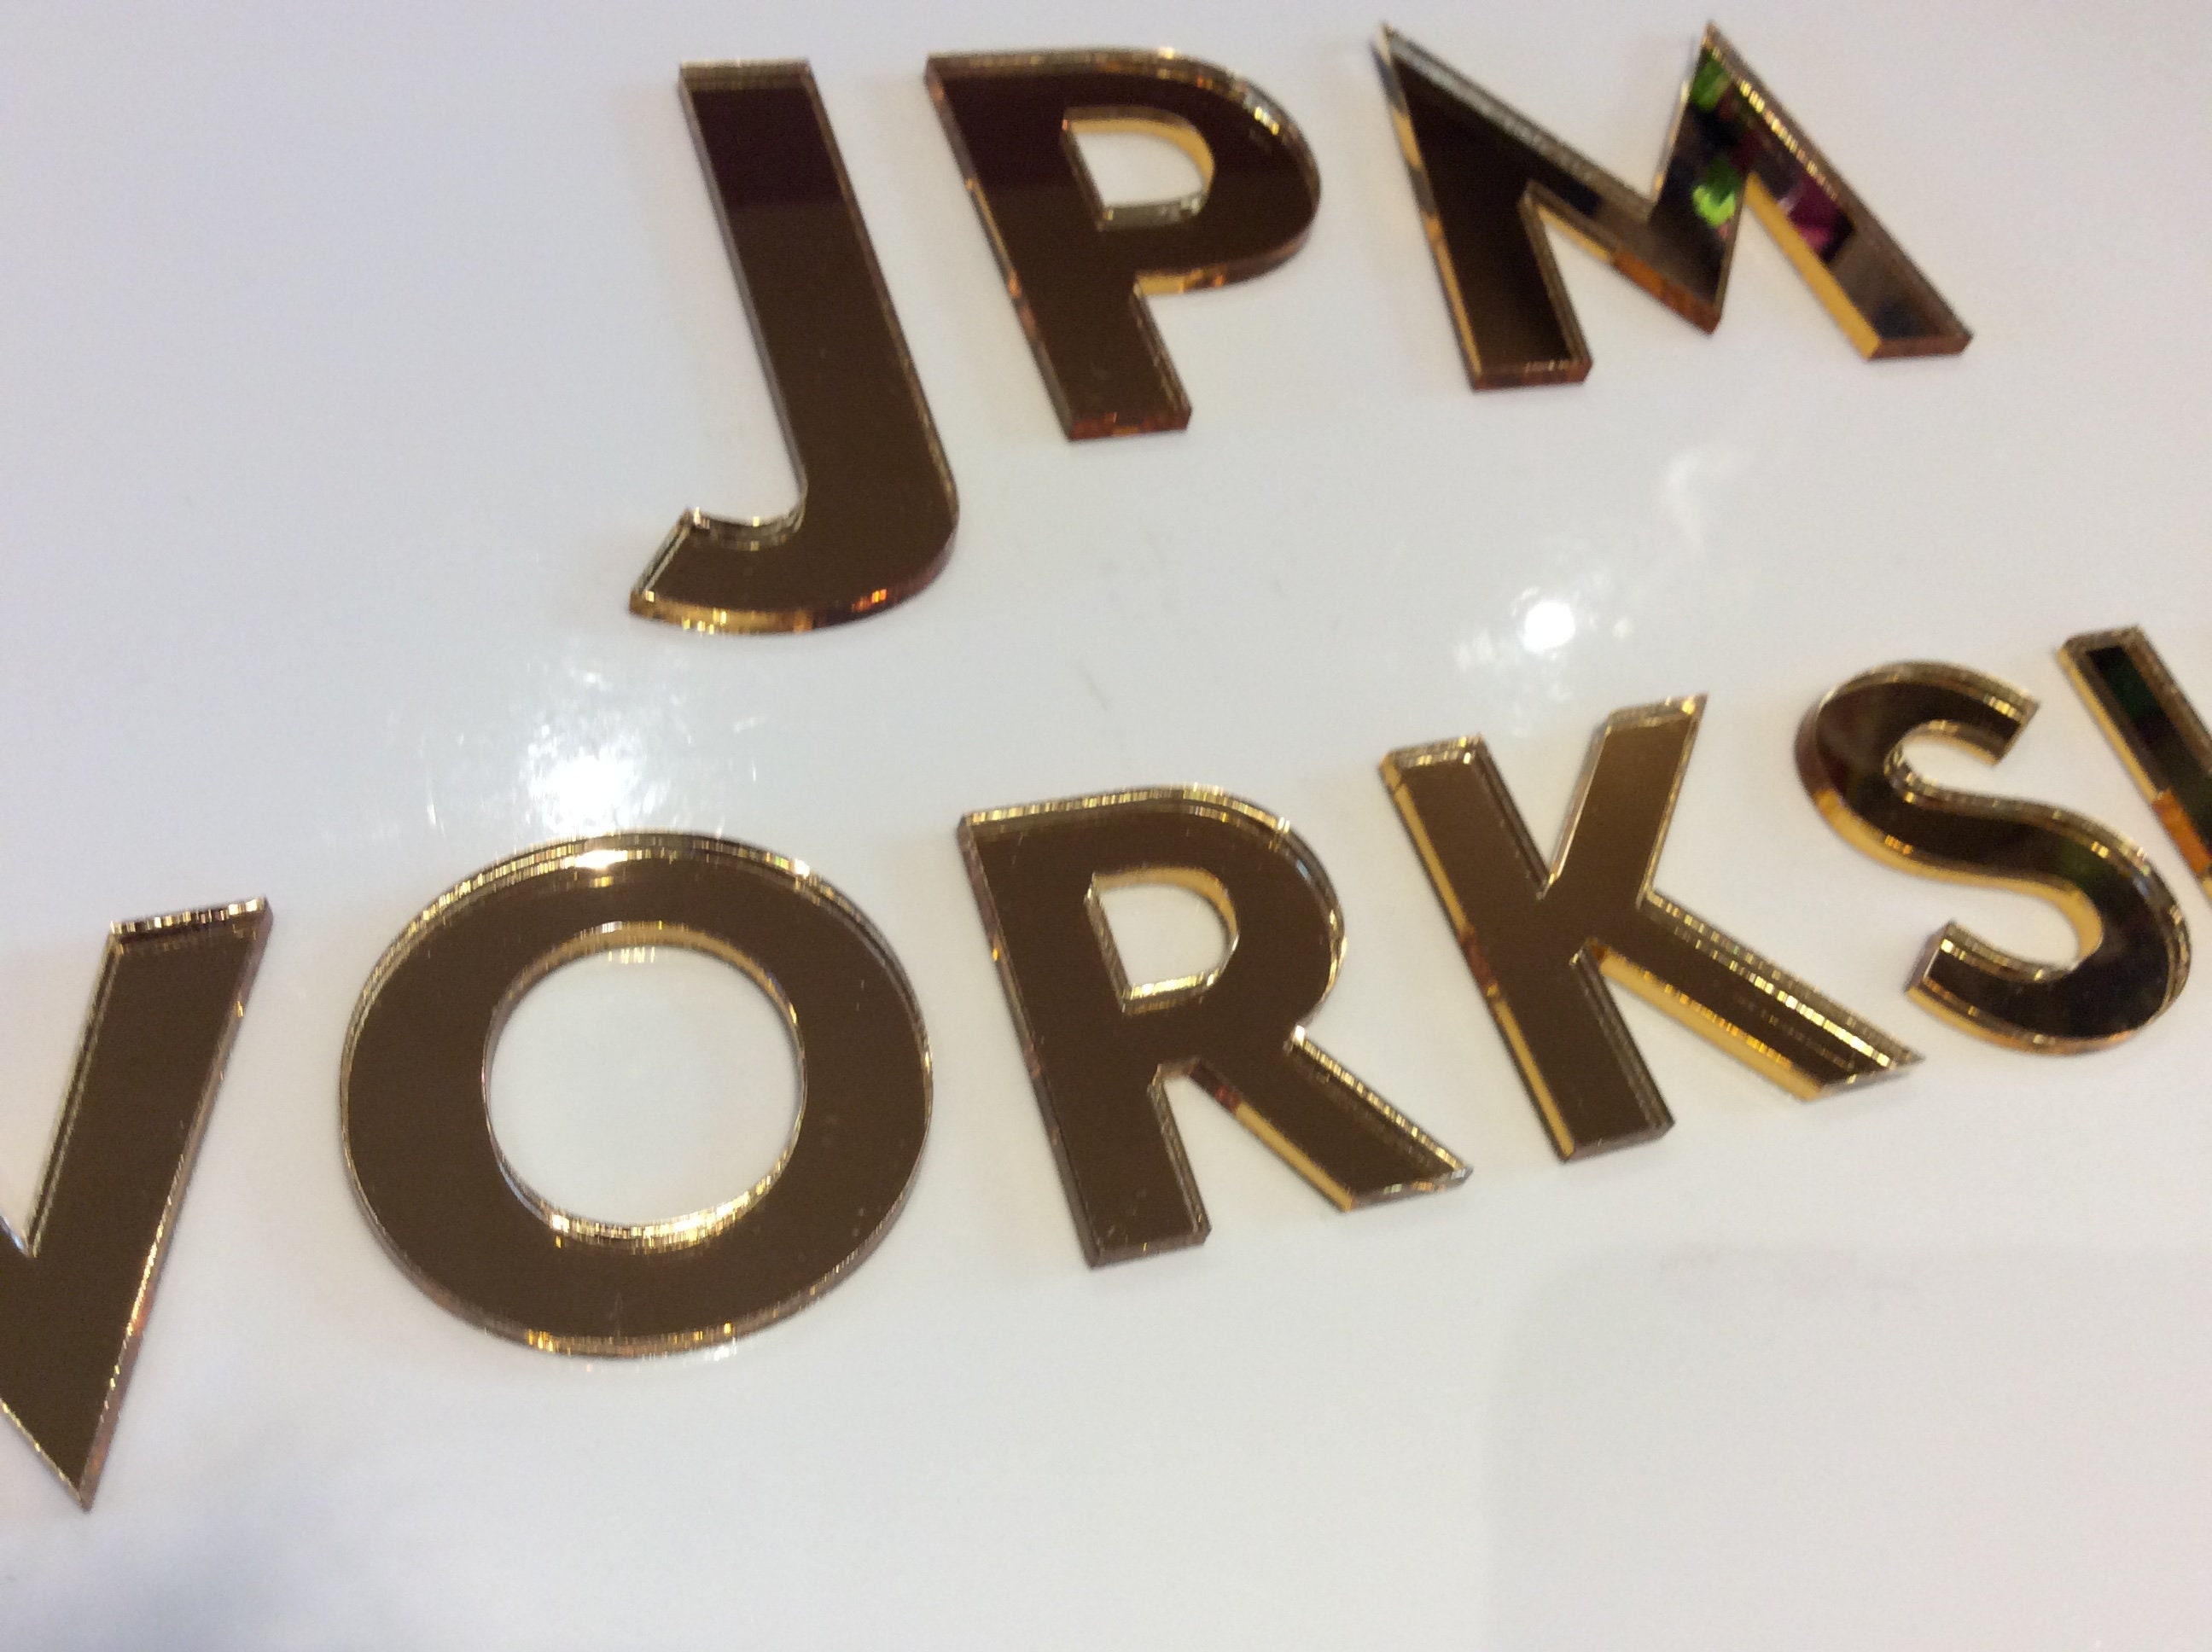 Acrylic Baking Accessories, Letters Acrylic Gold Cake